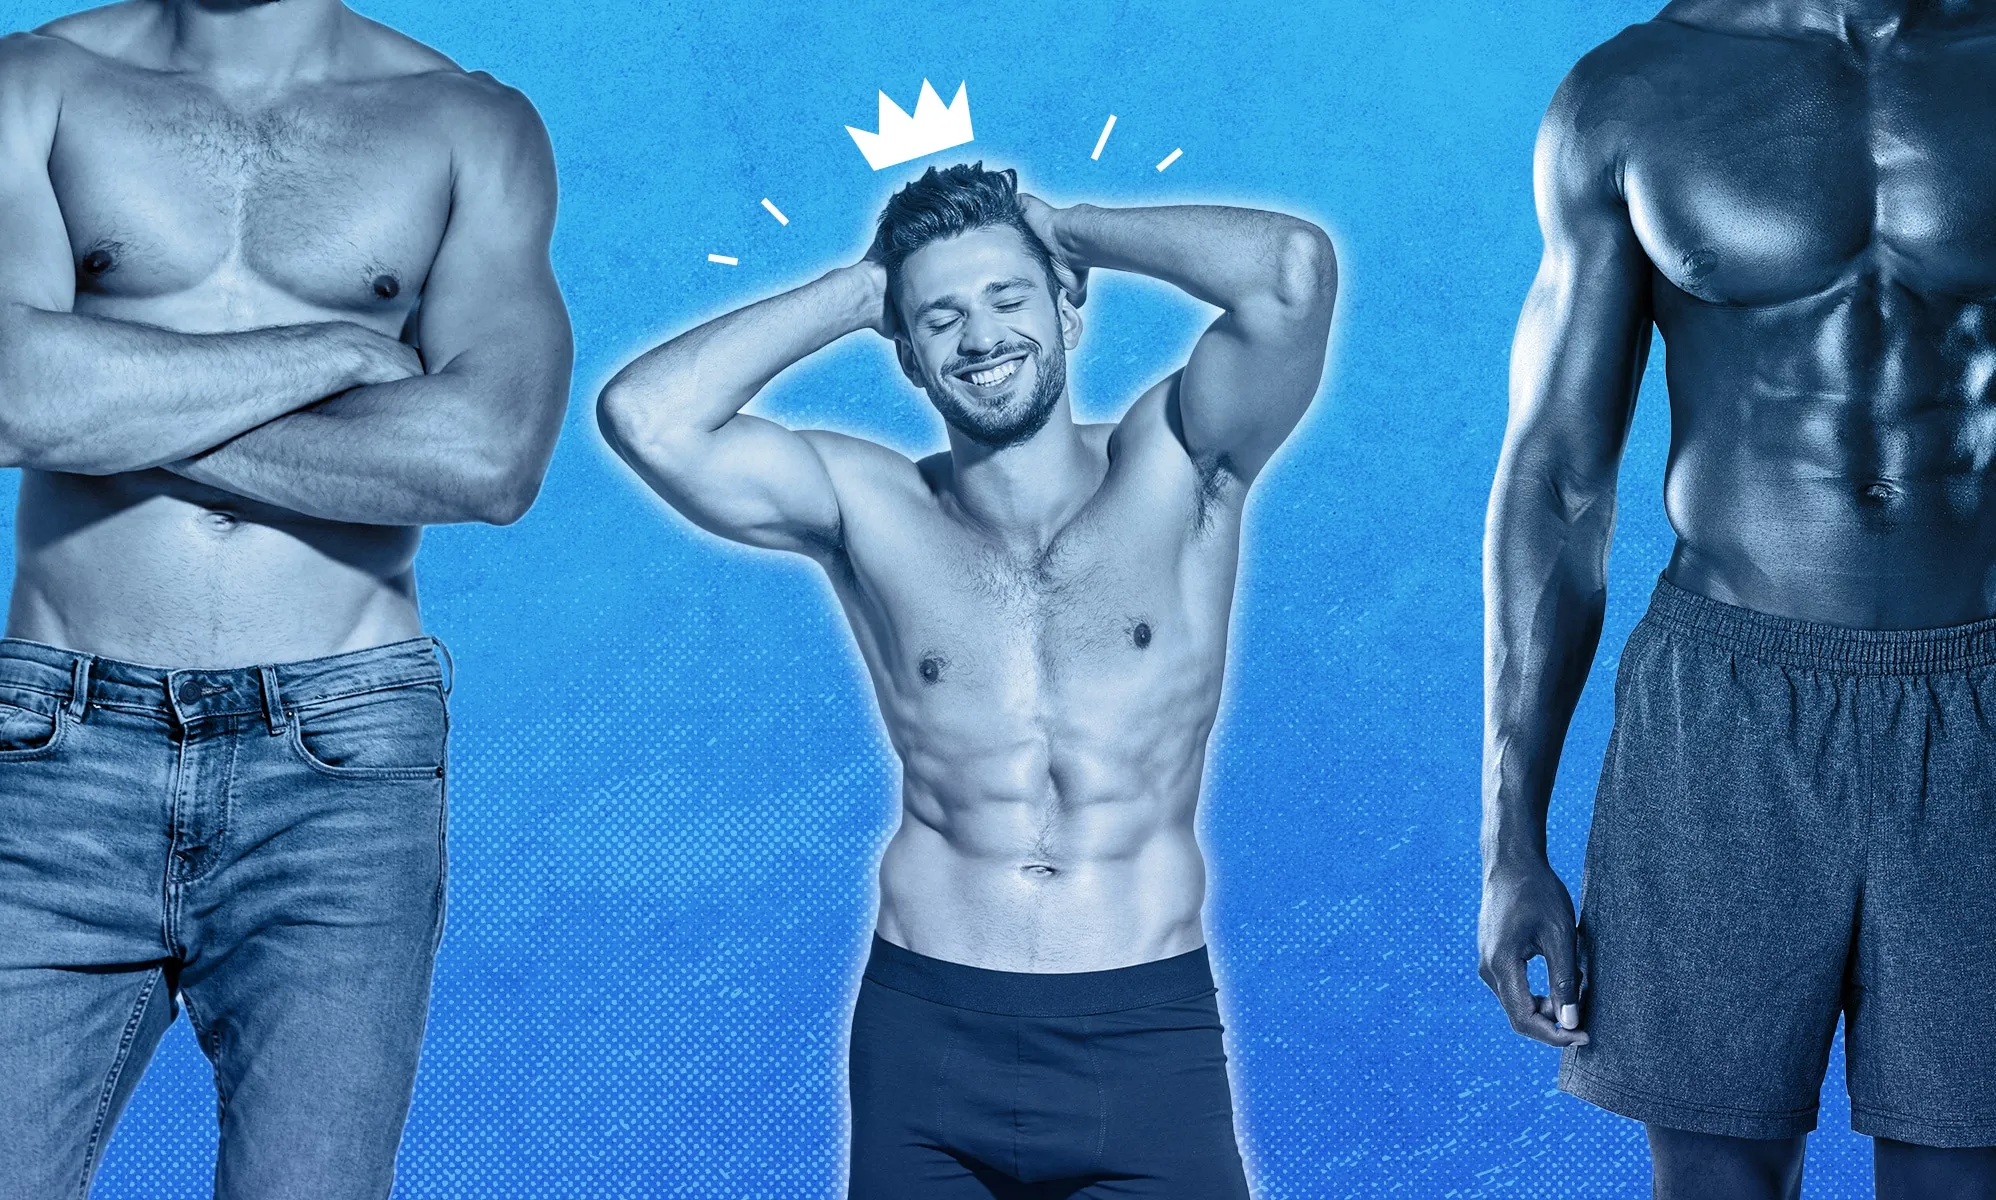 Tall tops and short bottoms: How height became a toxic gay dating trope